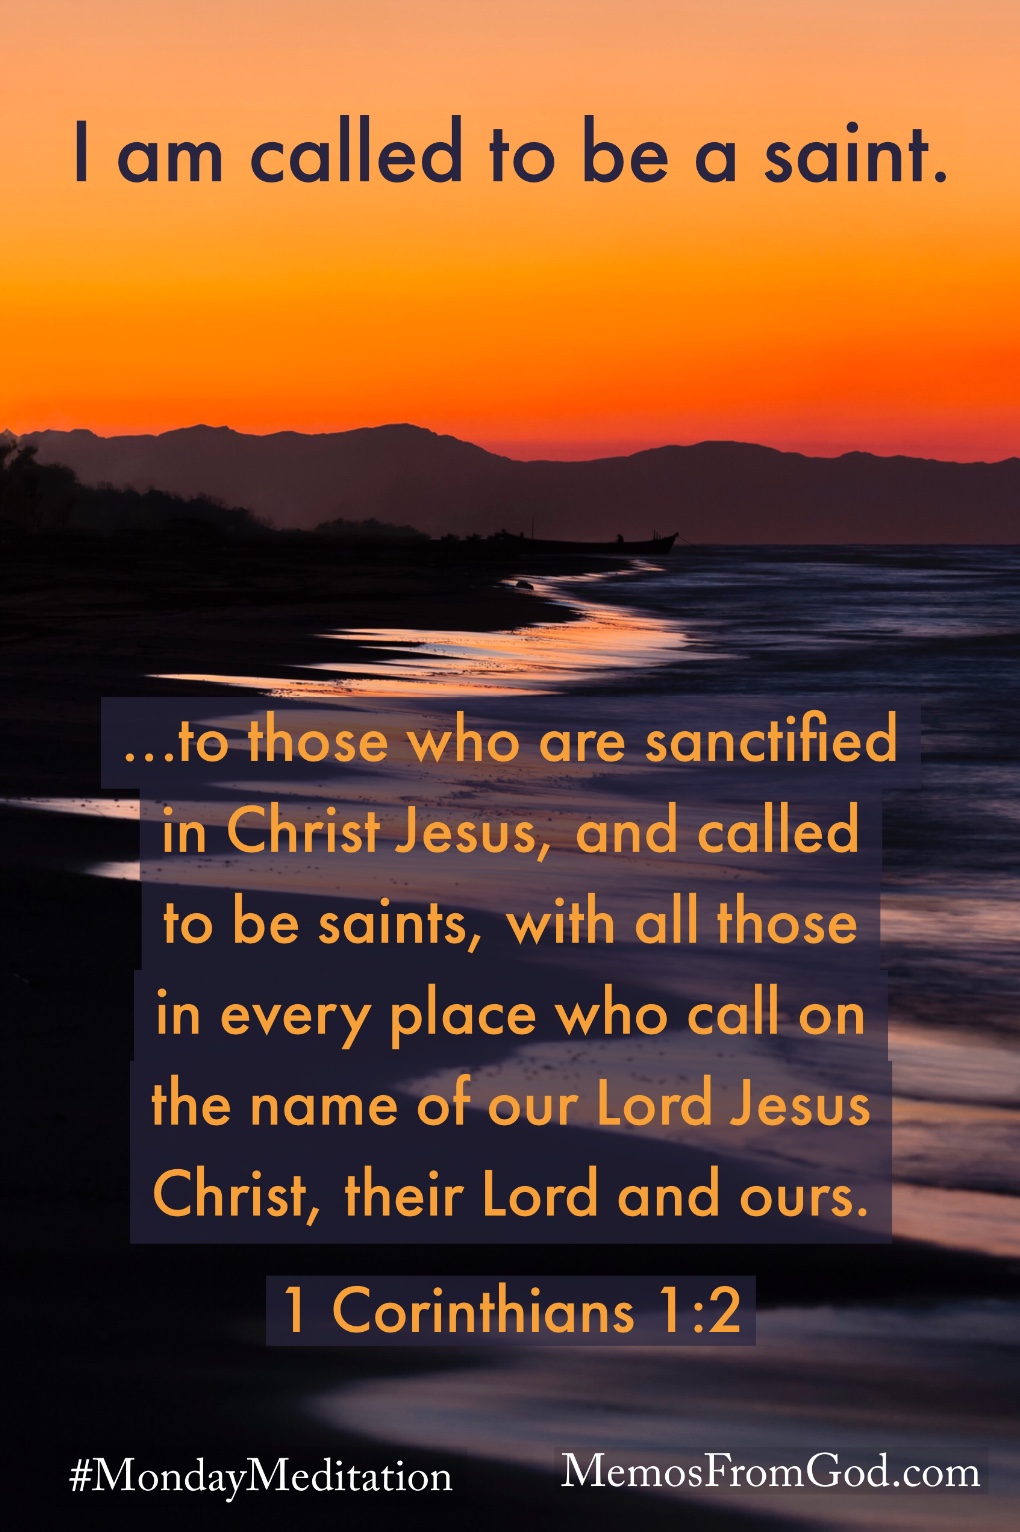 A glowing orange sky above mountains reflecting in a shallow river. Caption: ...to those who are sanctified in Christ Jesus, and called to be saints, with all those in every place who call on the name of our Lord Jesus Christ, their Lord and ours. 1 Corinthians 1:2